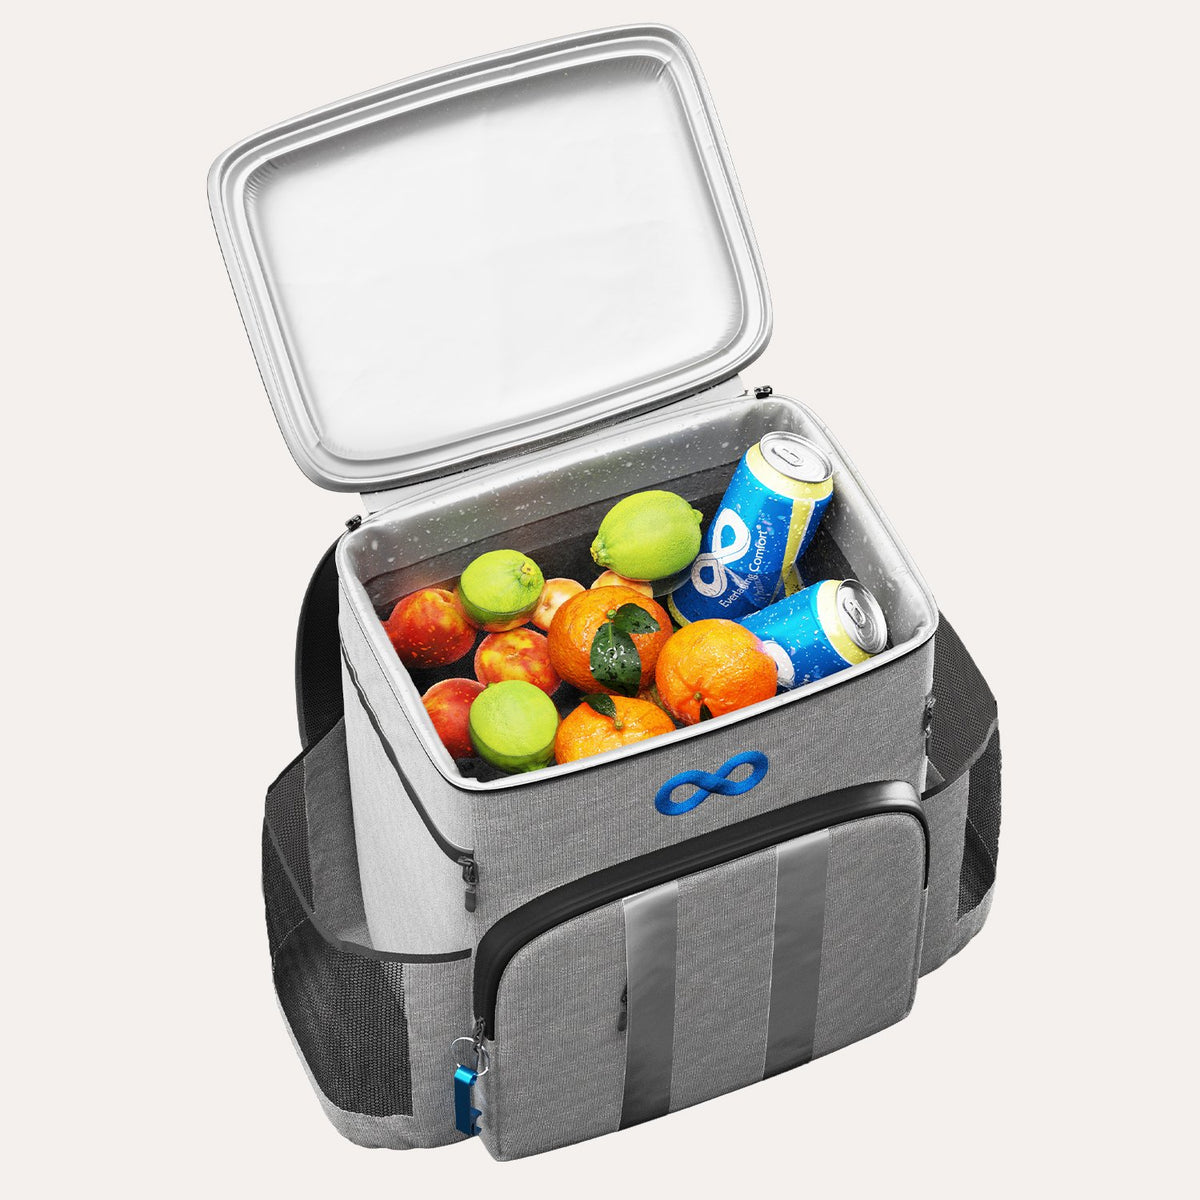 Portable Multi-function Insulated Cooler Food Bag for Beach Camping Picnic  Mesh Bags Cooler Tote Waterproof Storage Bags 5 Colors